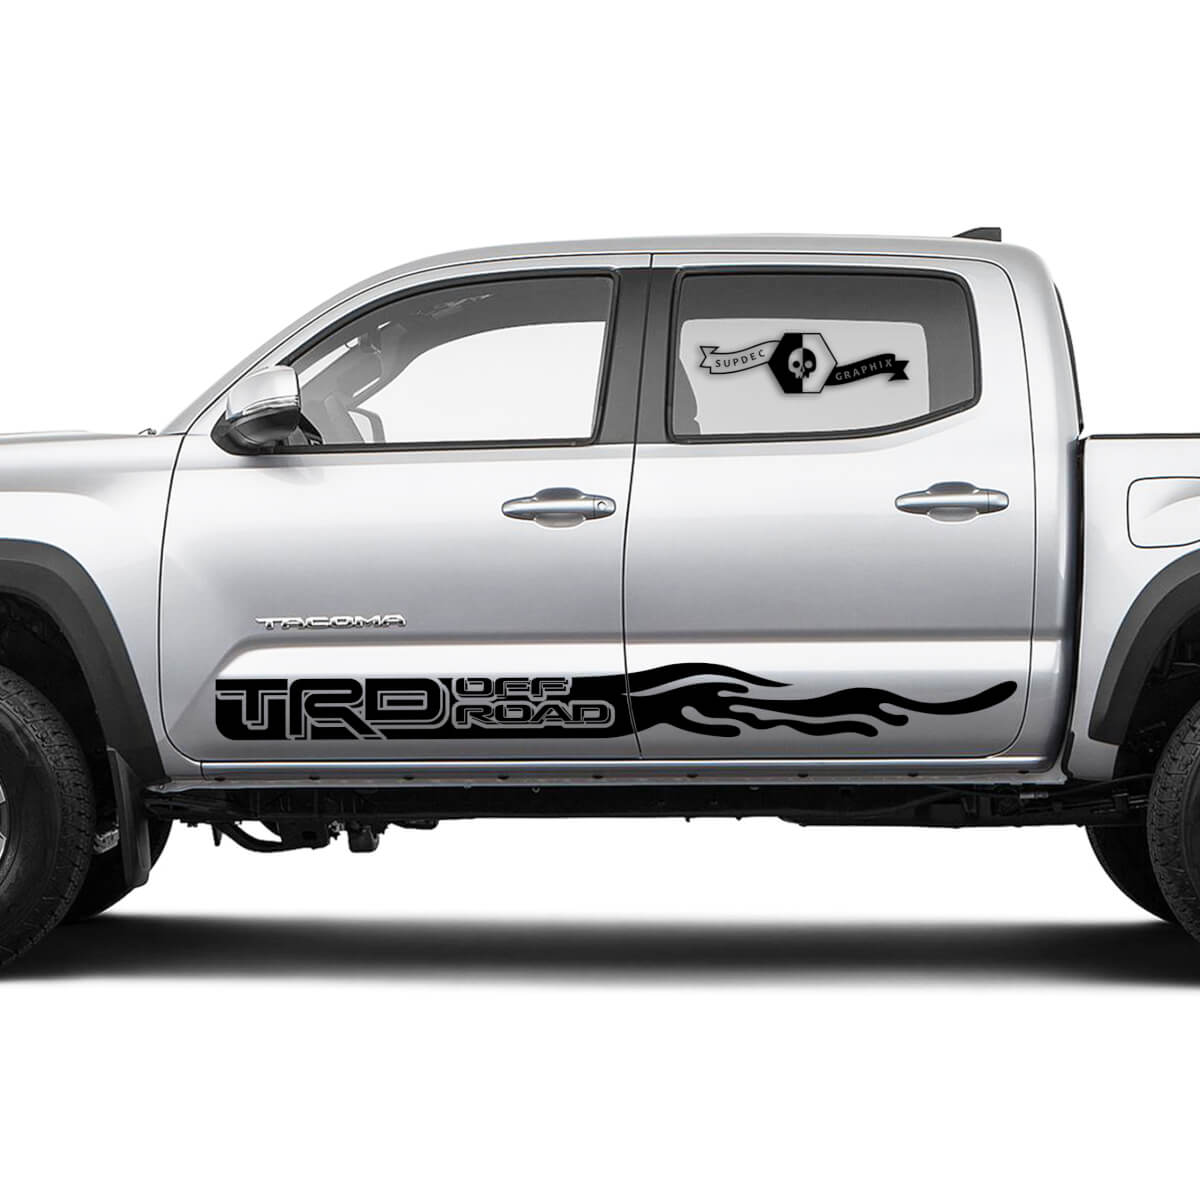 TRD Off Road TOYOTA Flame Drops stripes Decals Stickers for Tacoma Tundra 4Runner Hilux Doors